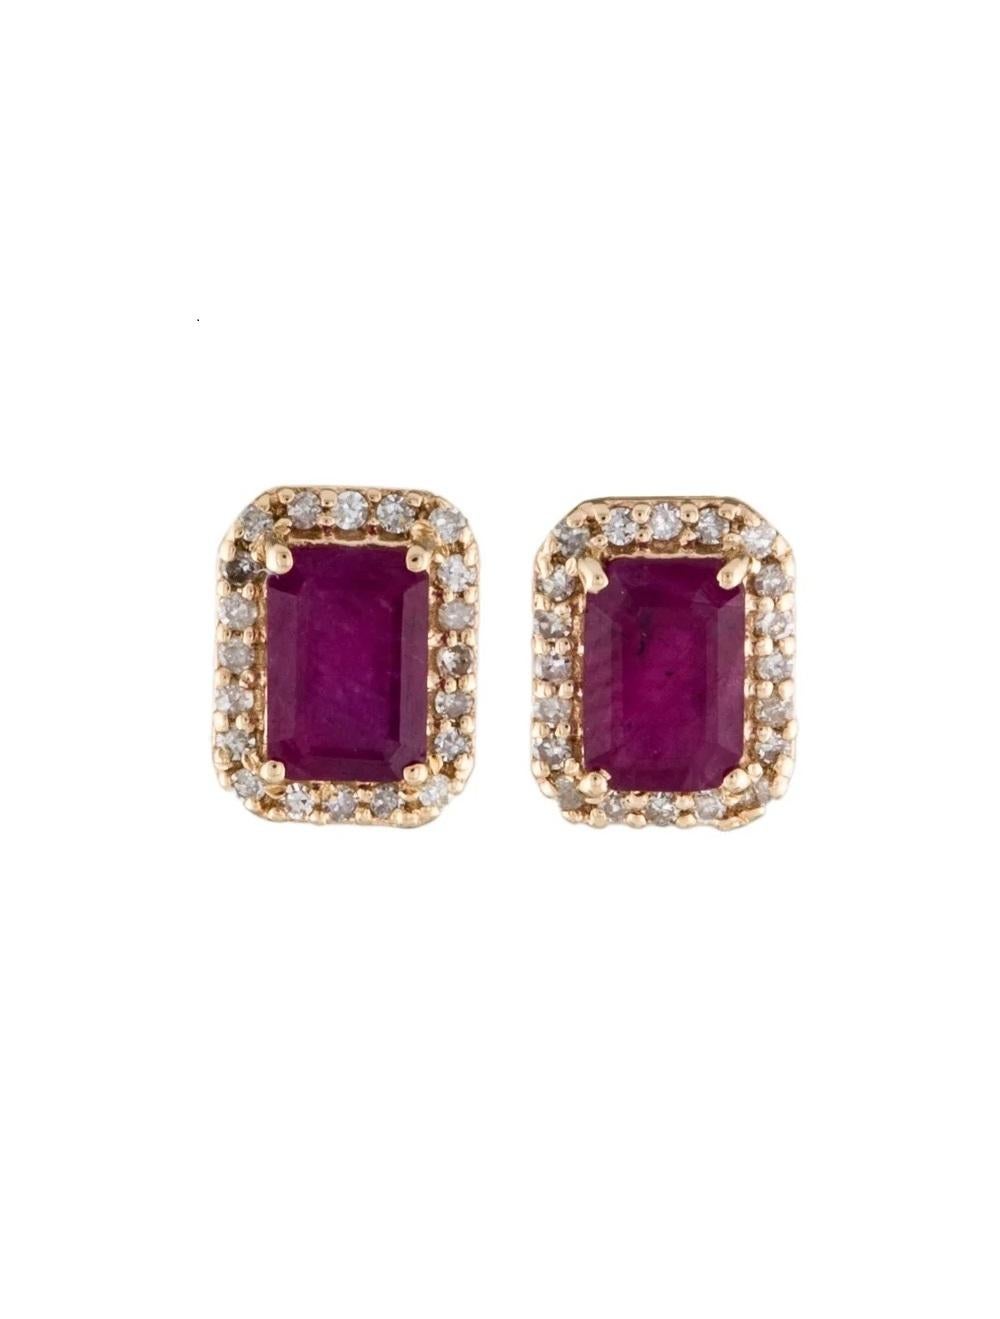 14K Ruby & Diamond Stud Earrings, 1.63ctw - Classic Design, Timeless Beauty In New Condition For Sale In Holtsville, NY